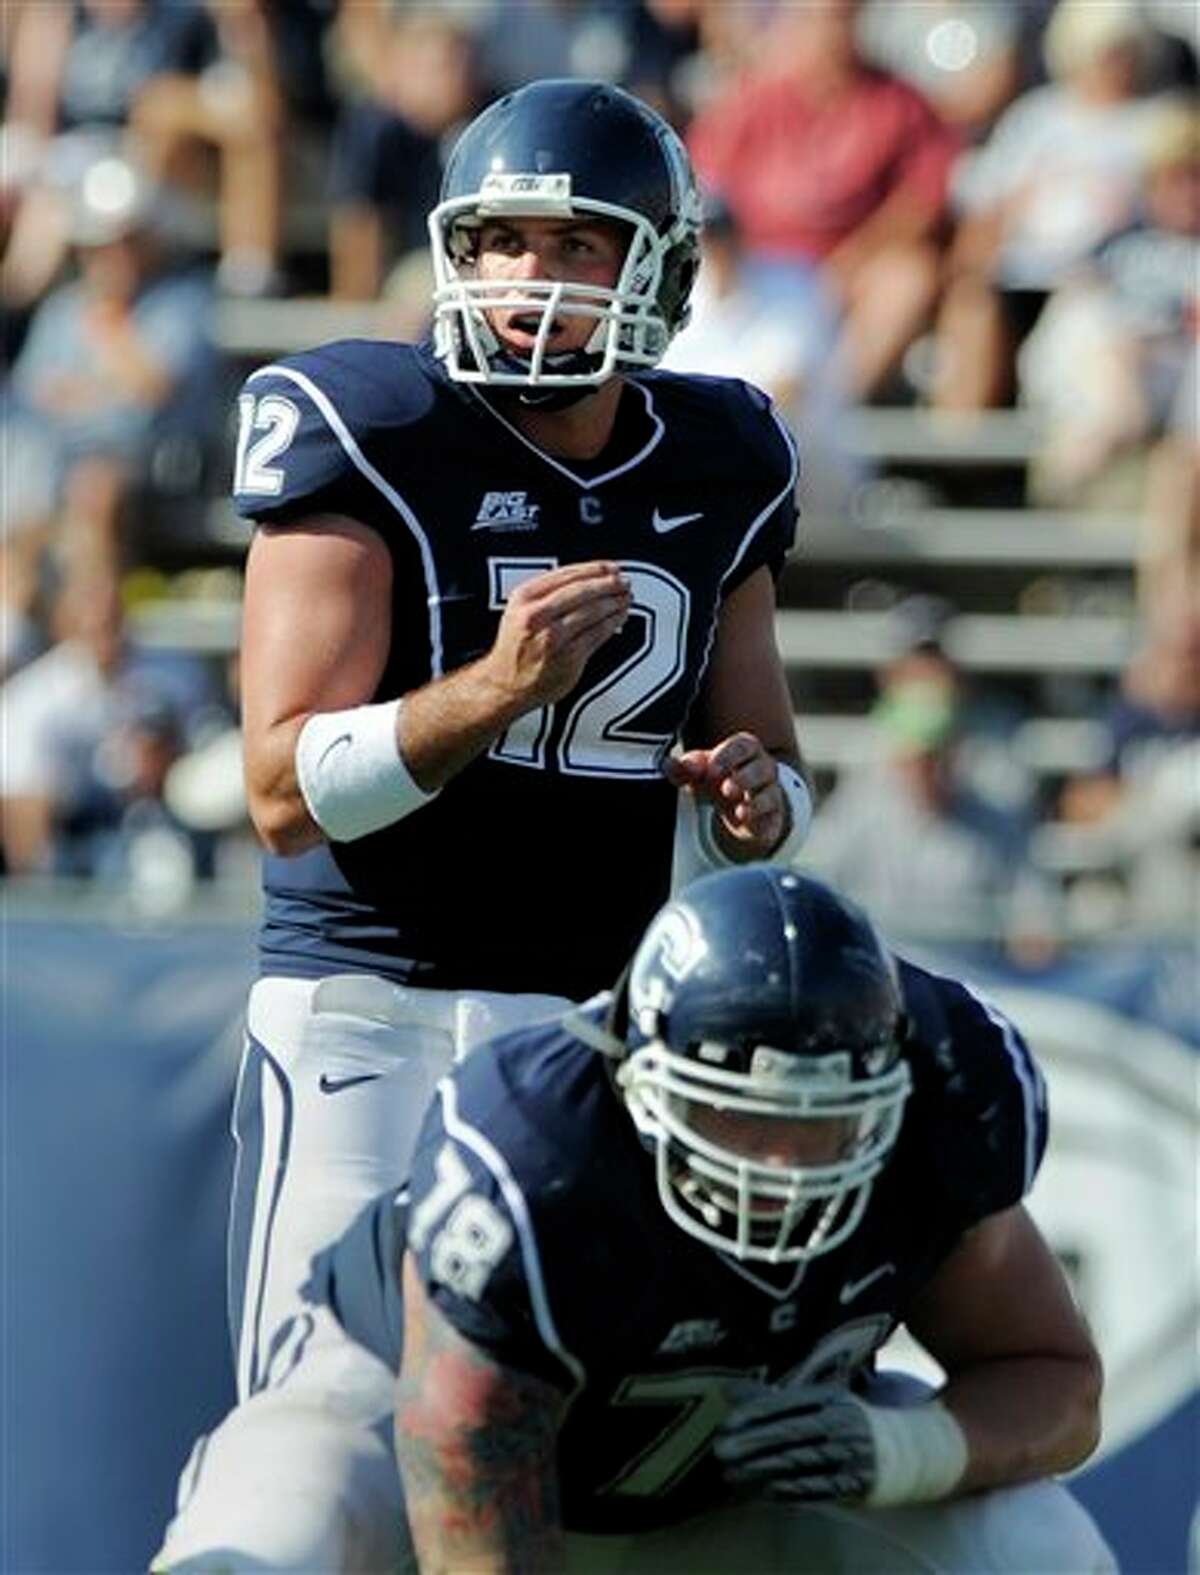 Connecticut  quarterback Cody Endres (12) looks over Buffalo's defense during the second half of Connecticut's 45-21 victory in their NCAA football game in East Hartford, Conn., on Saturday, Sept. 25, 2010. In the foreground is Guard Zach Hurd.